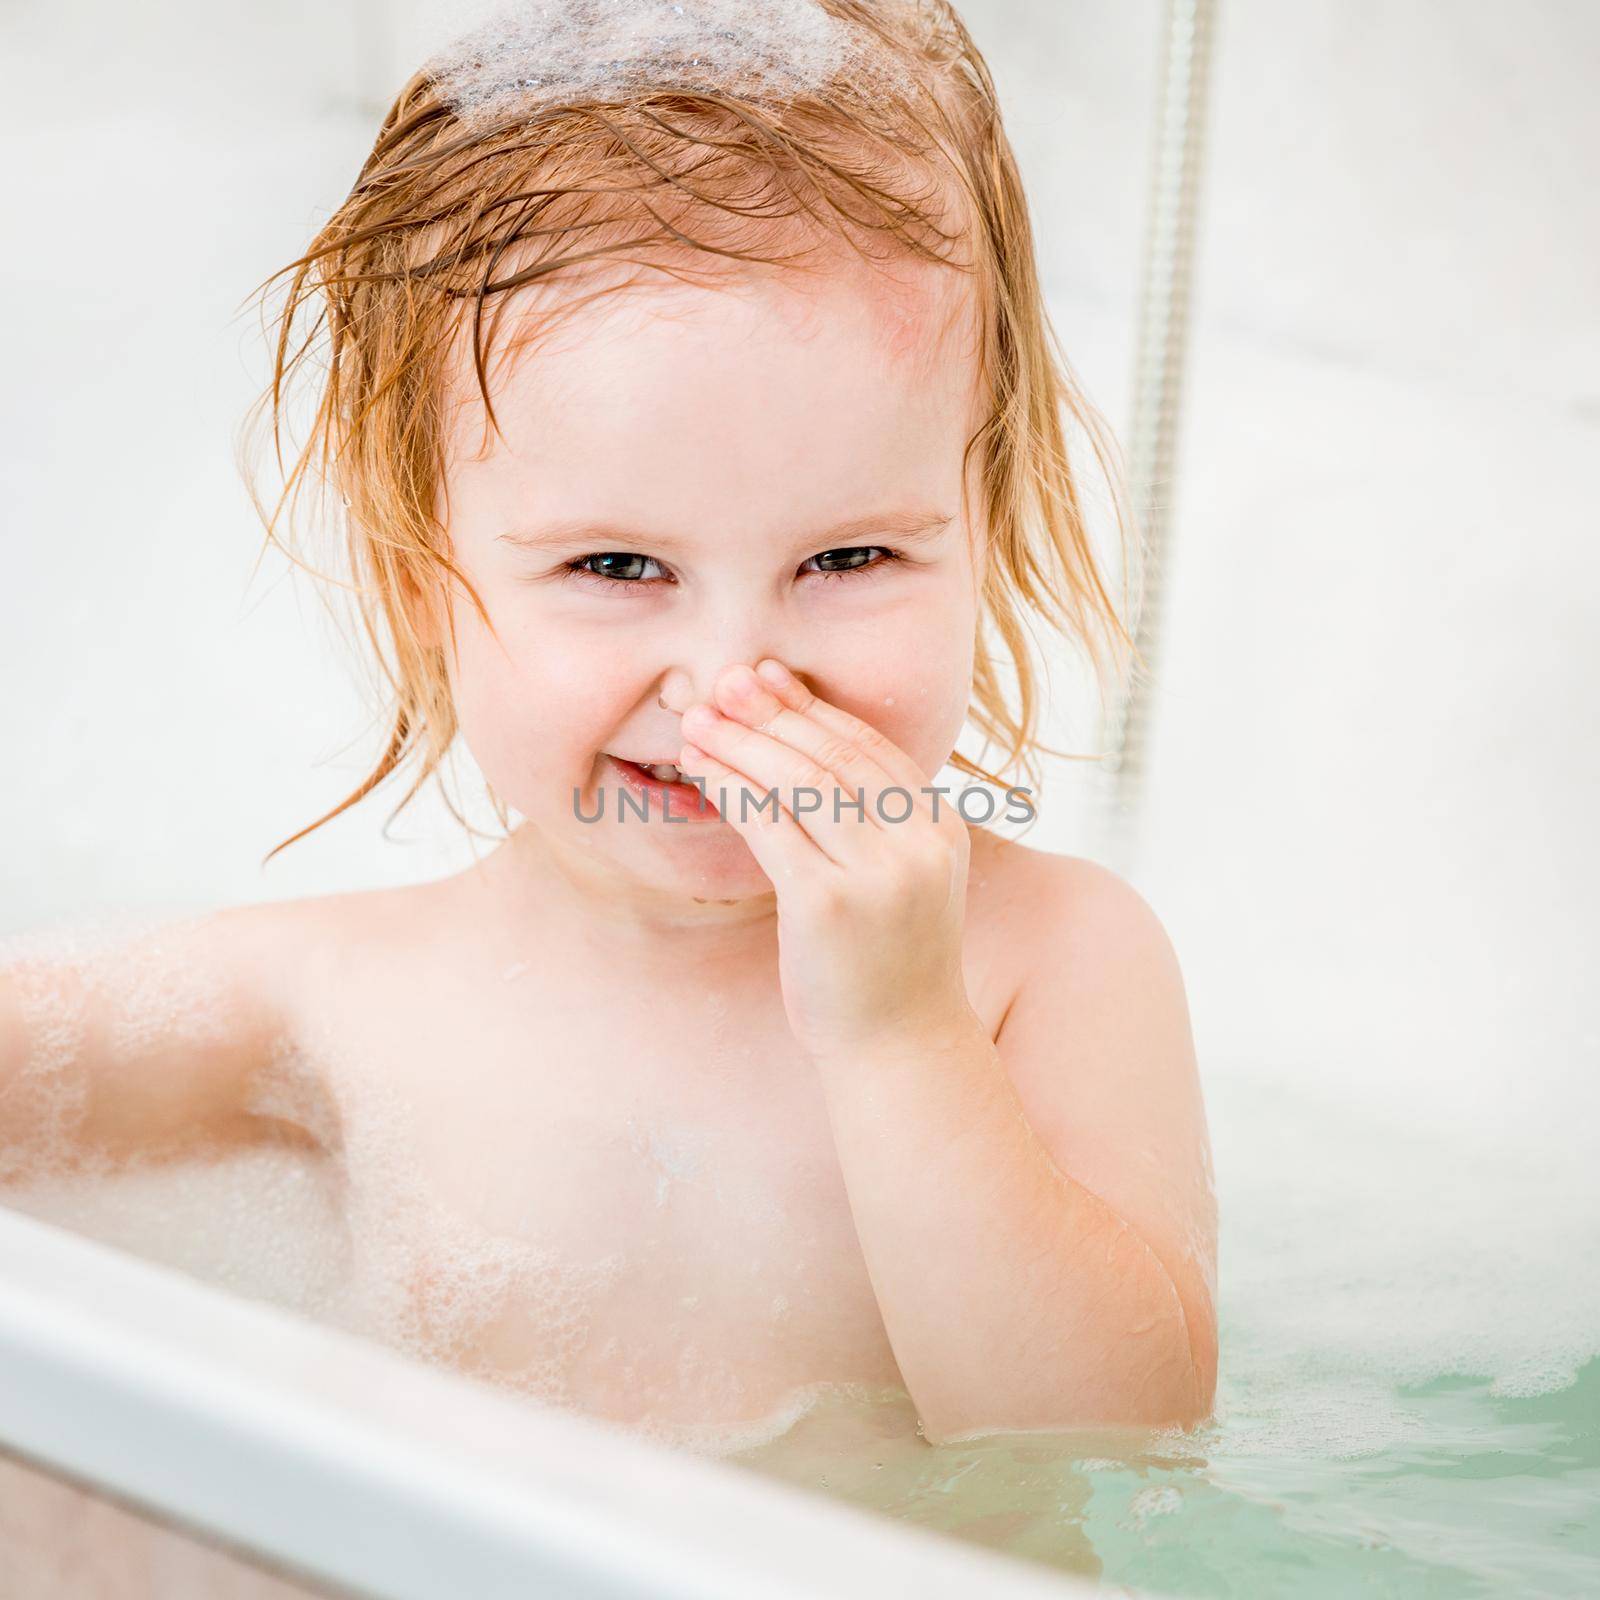 cute two year old baby bathes in a bath with foam closeup